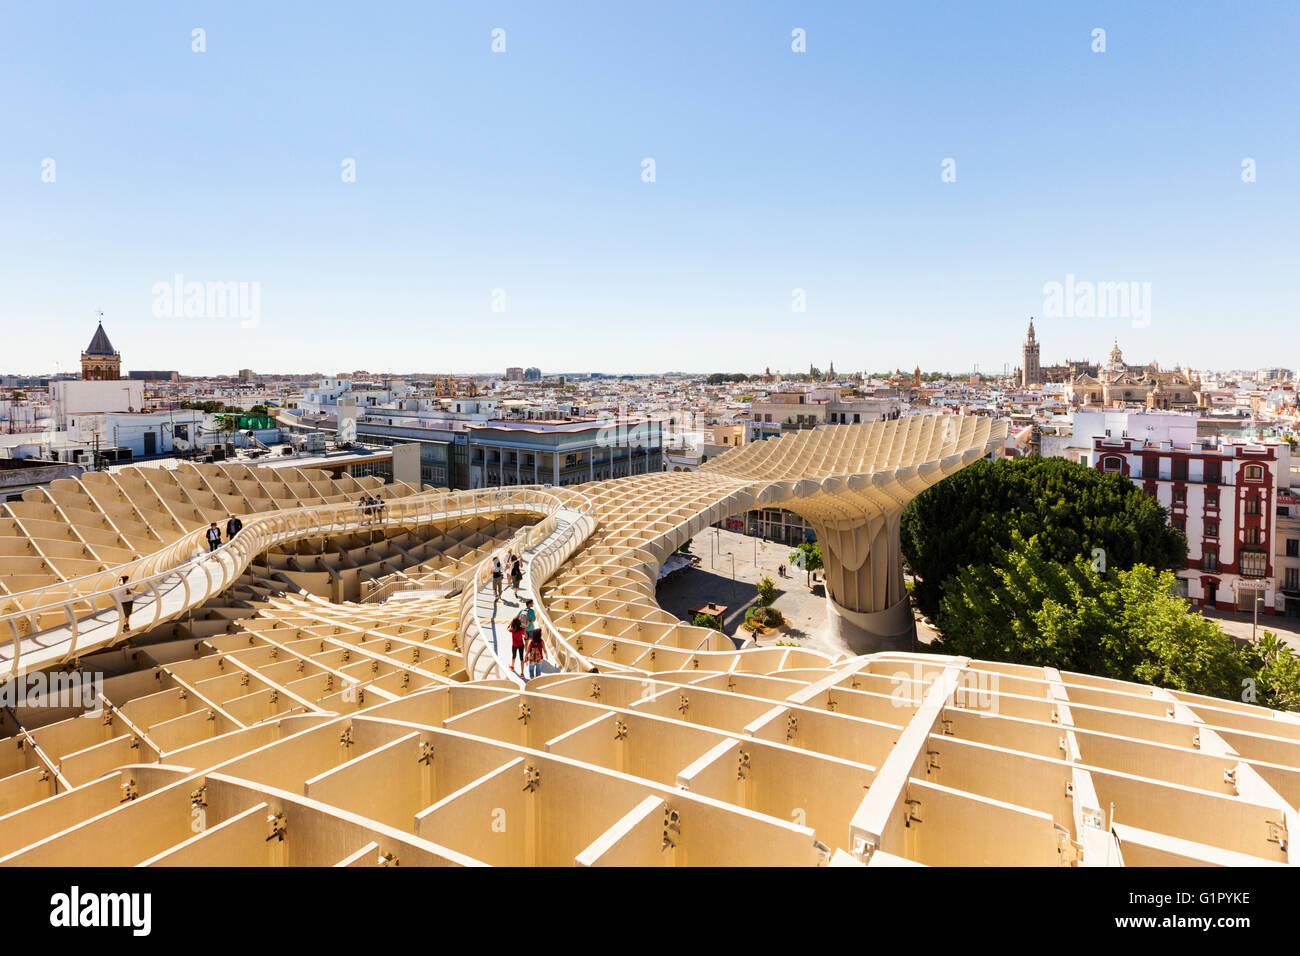 Tourists visiting the lookout on Metropol Parasol building at Seville, Spain, enjoying the view over the city Stock Photo